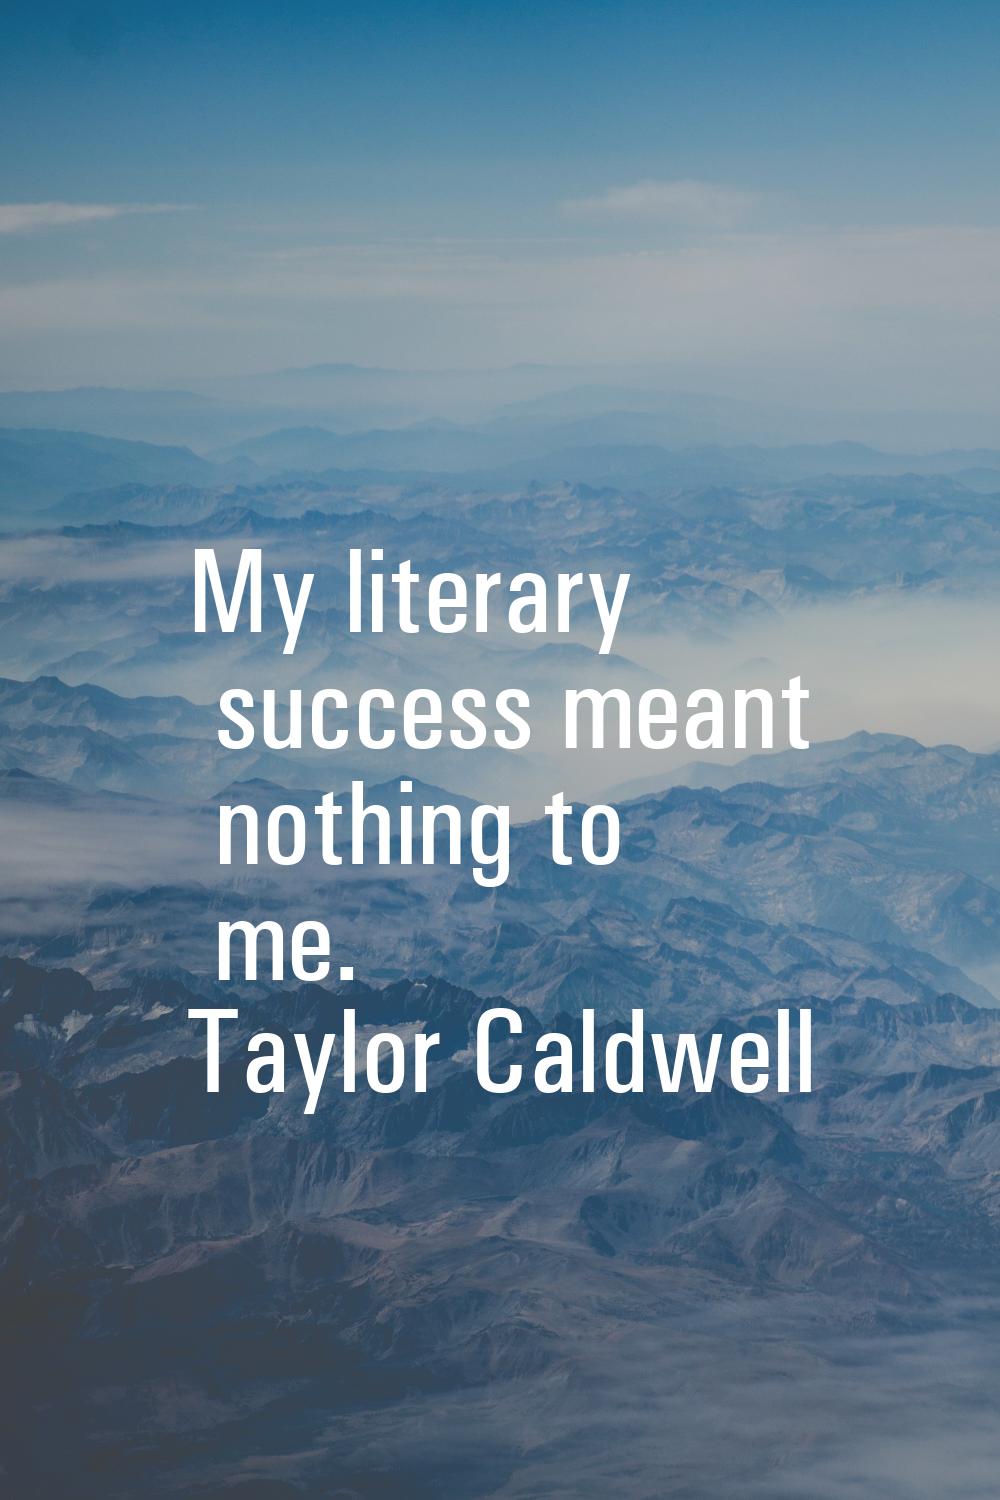 My literary success meant nothing to me.